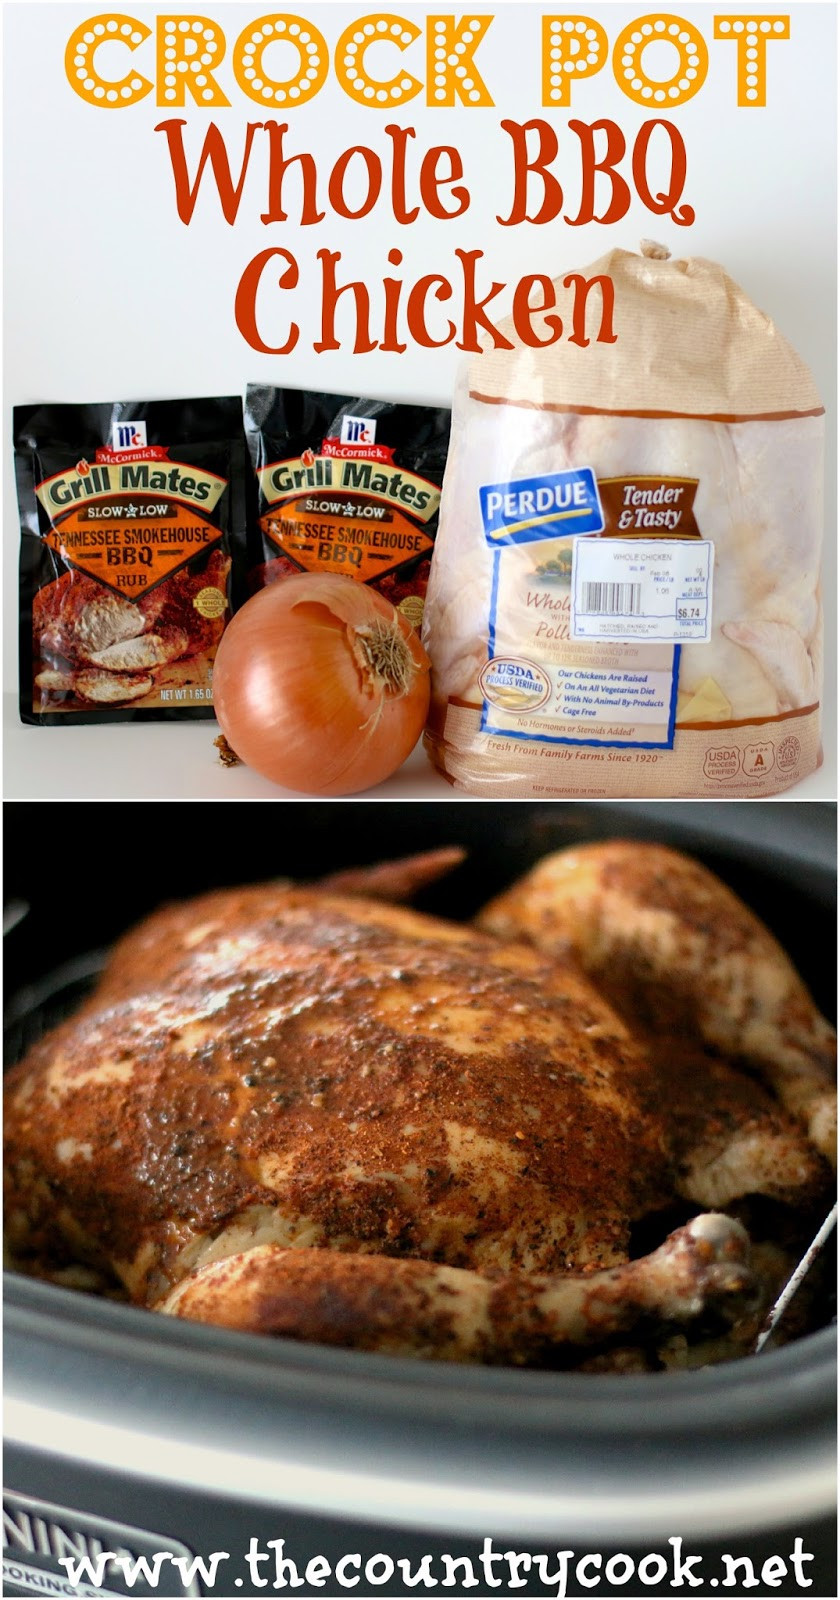 Whole Chicken Crock Pot Recipe
 The Country Cook Crock Pot Whole BBQ Chicken